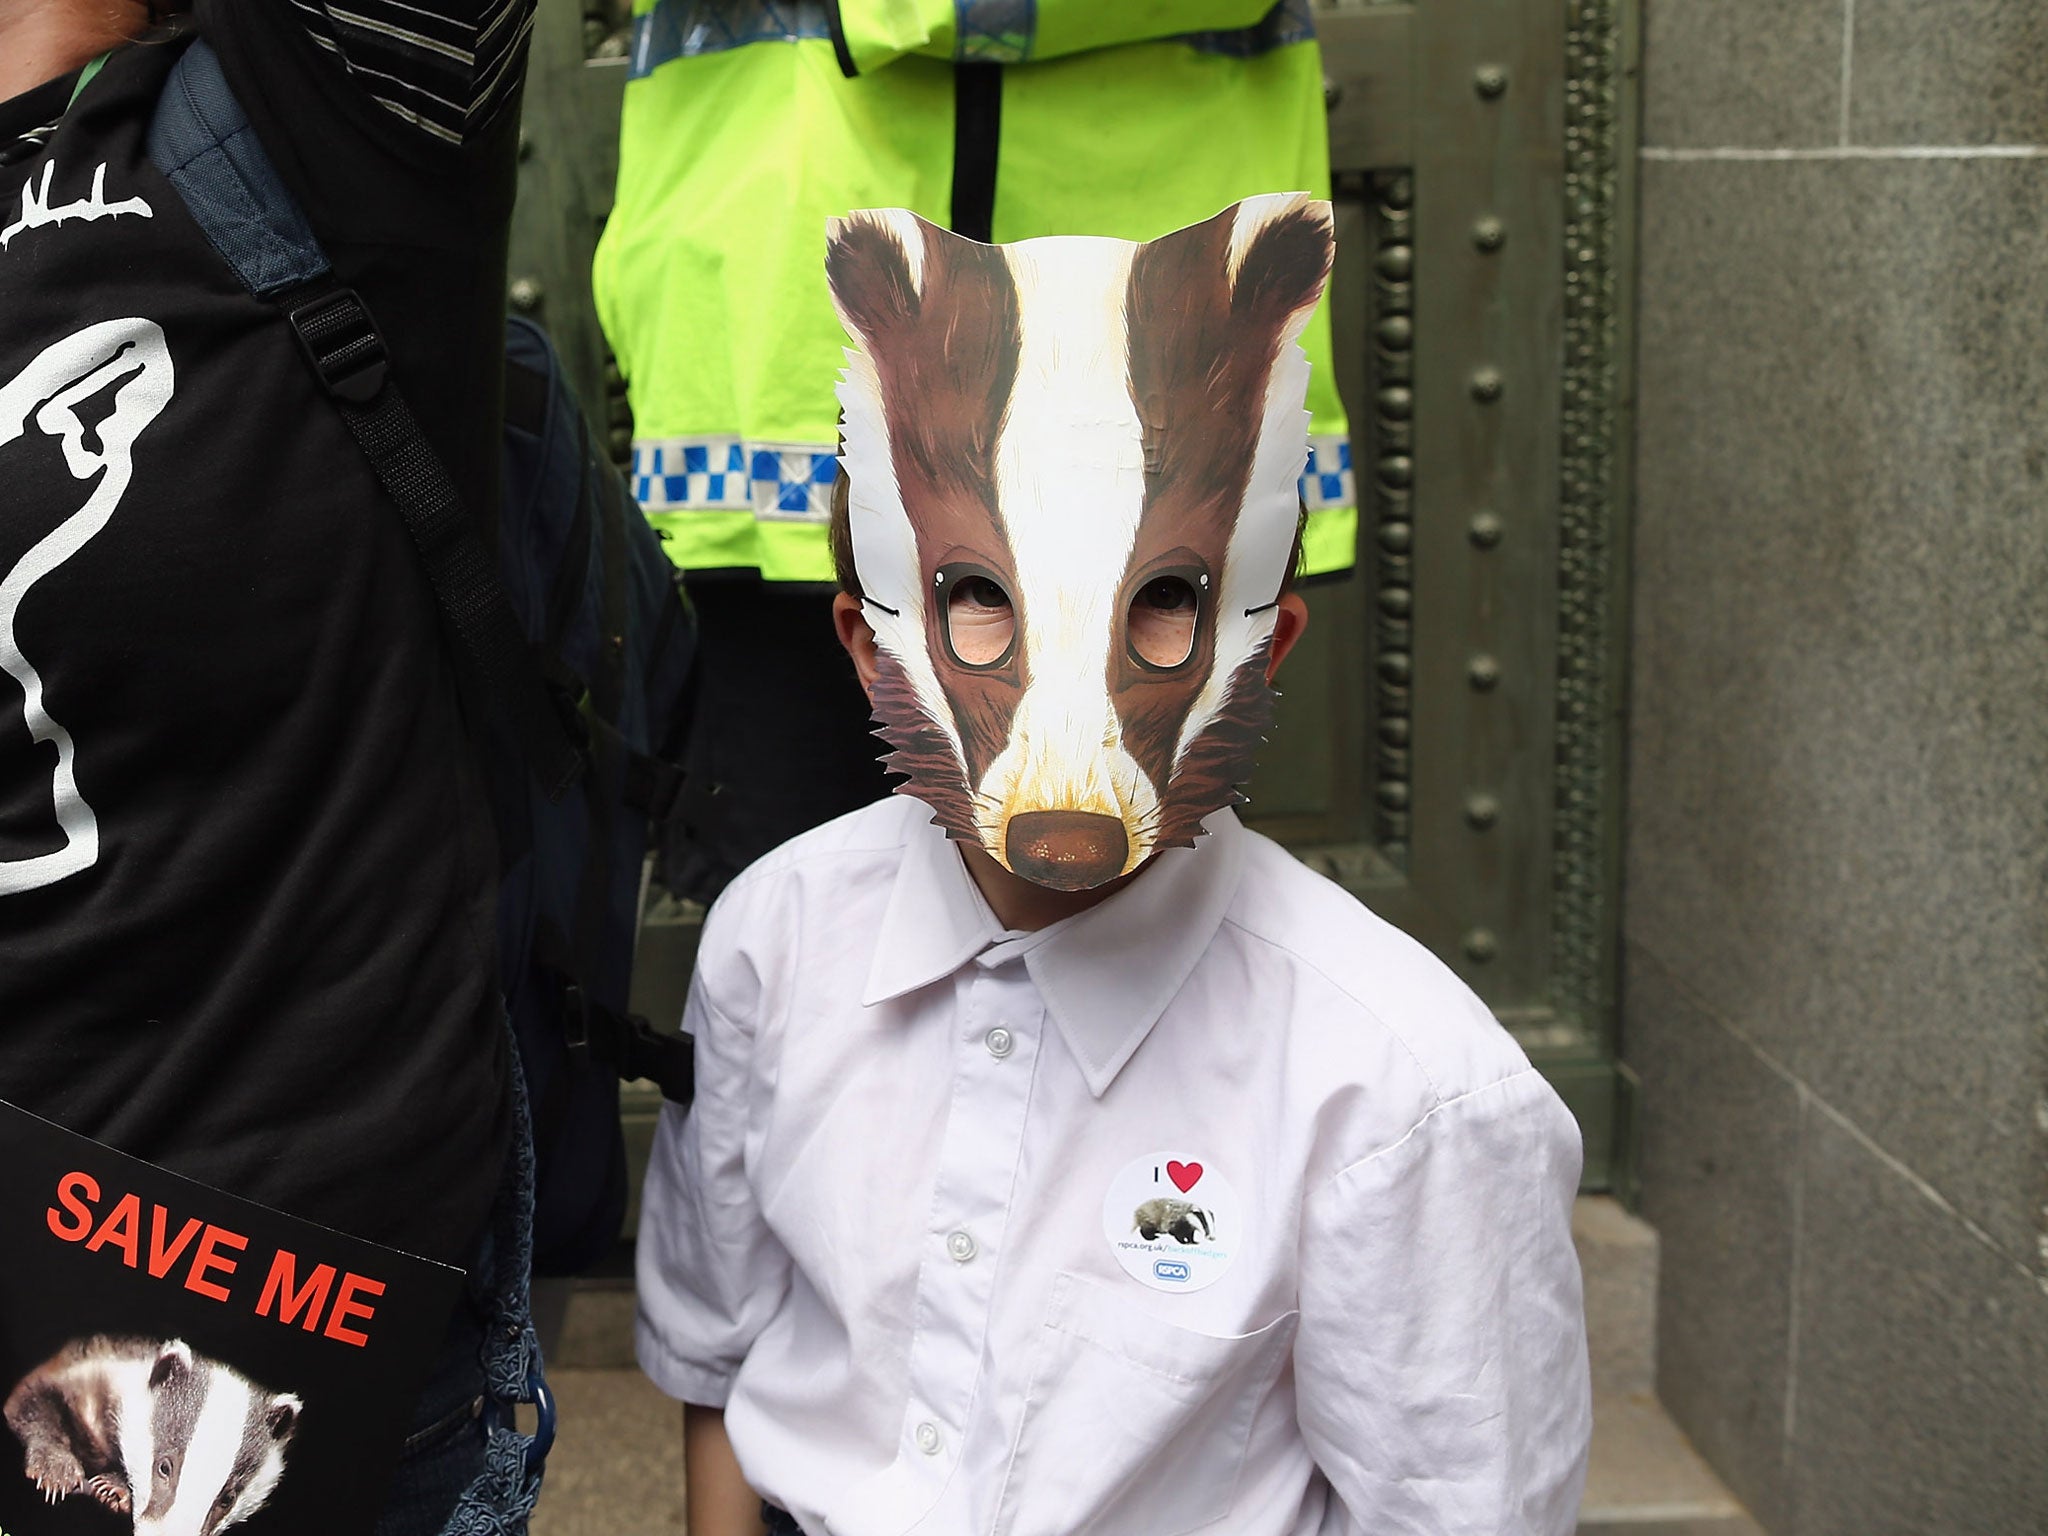 A badger supporter in London on Saturday